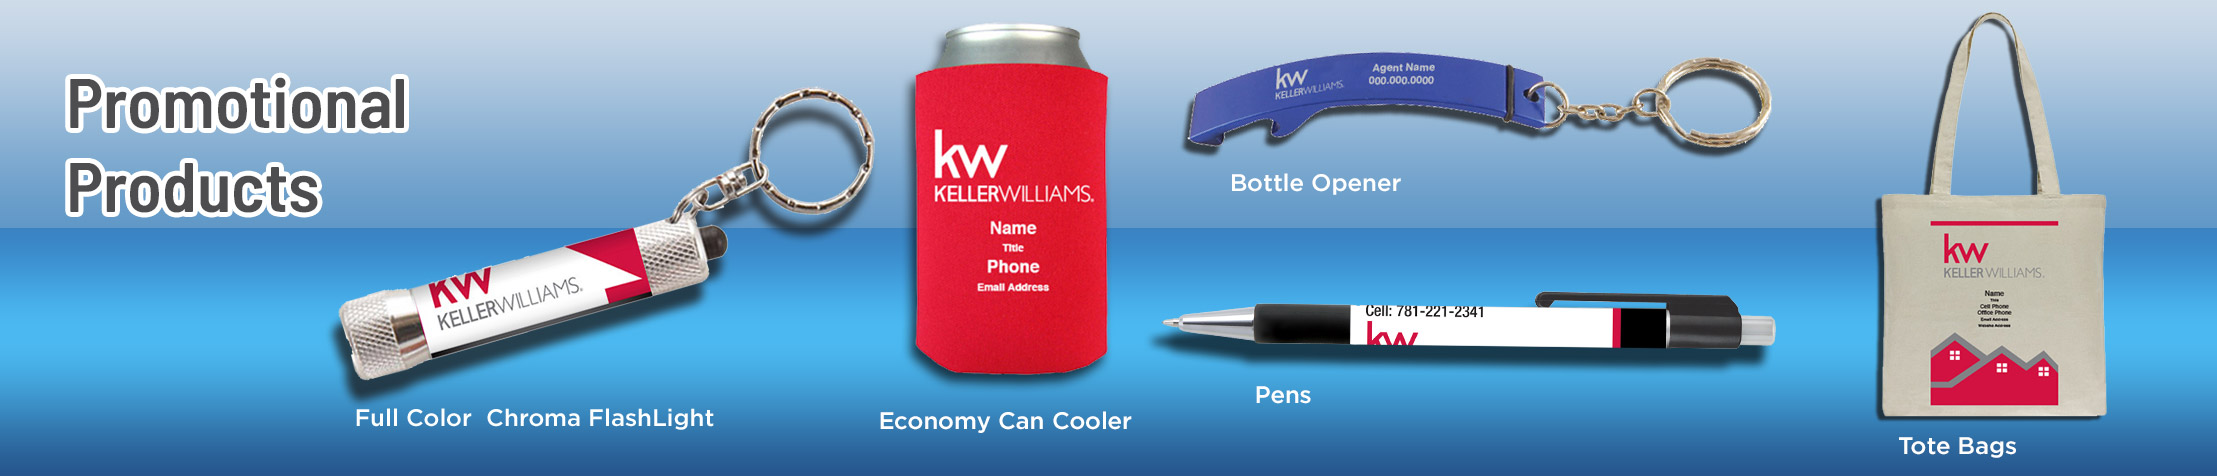 keller williams promotional products